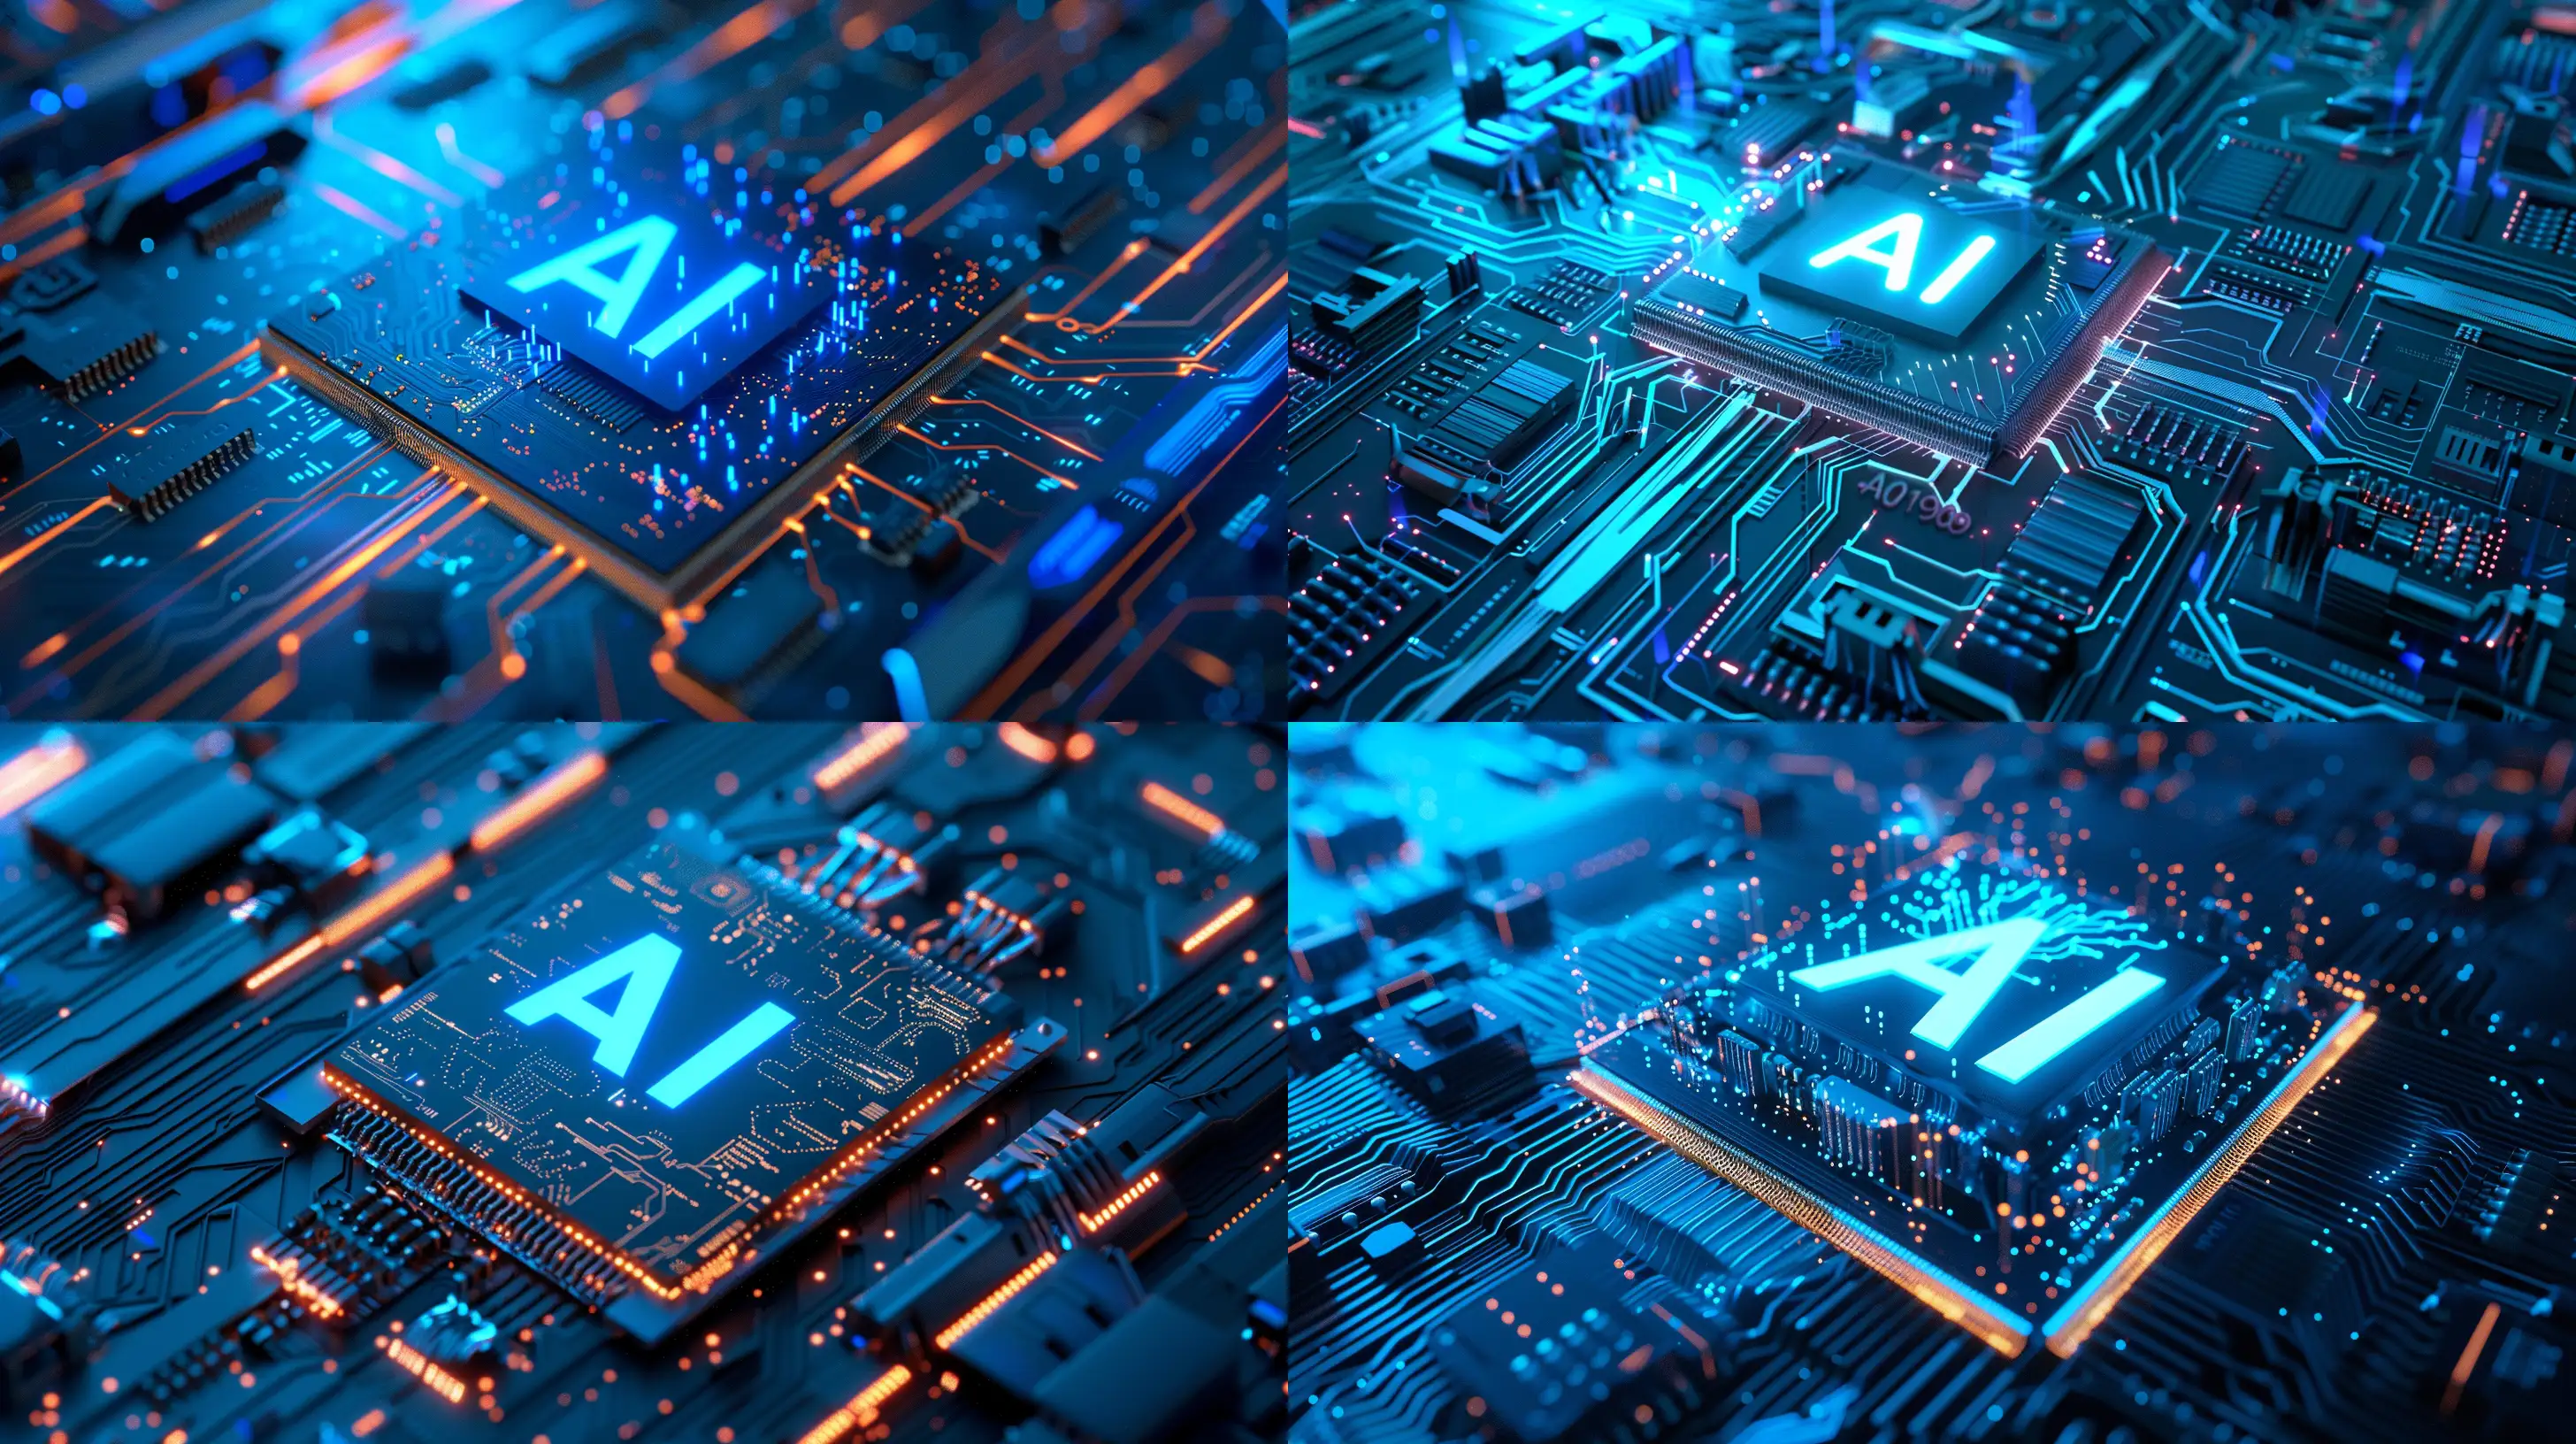 Futuristic-AI-Microchip-with-Glowing-Circuits-and-Data-Streams